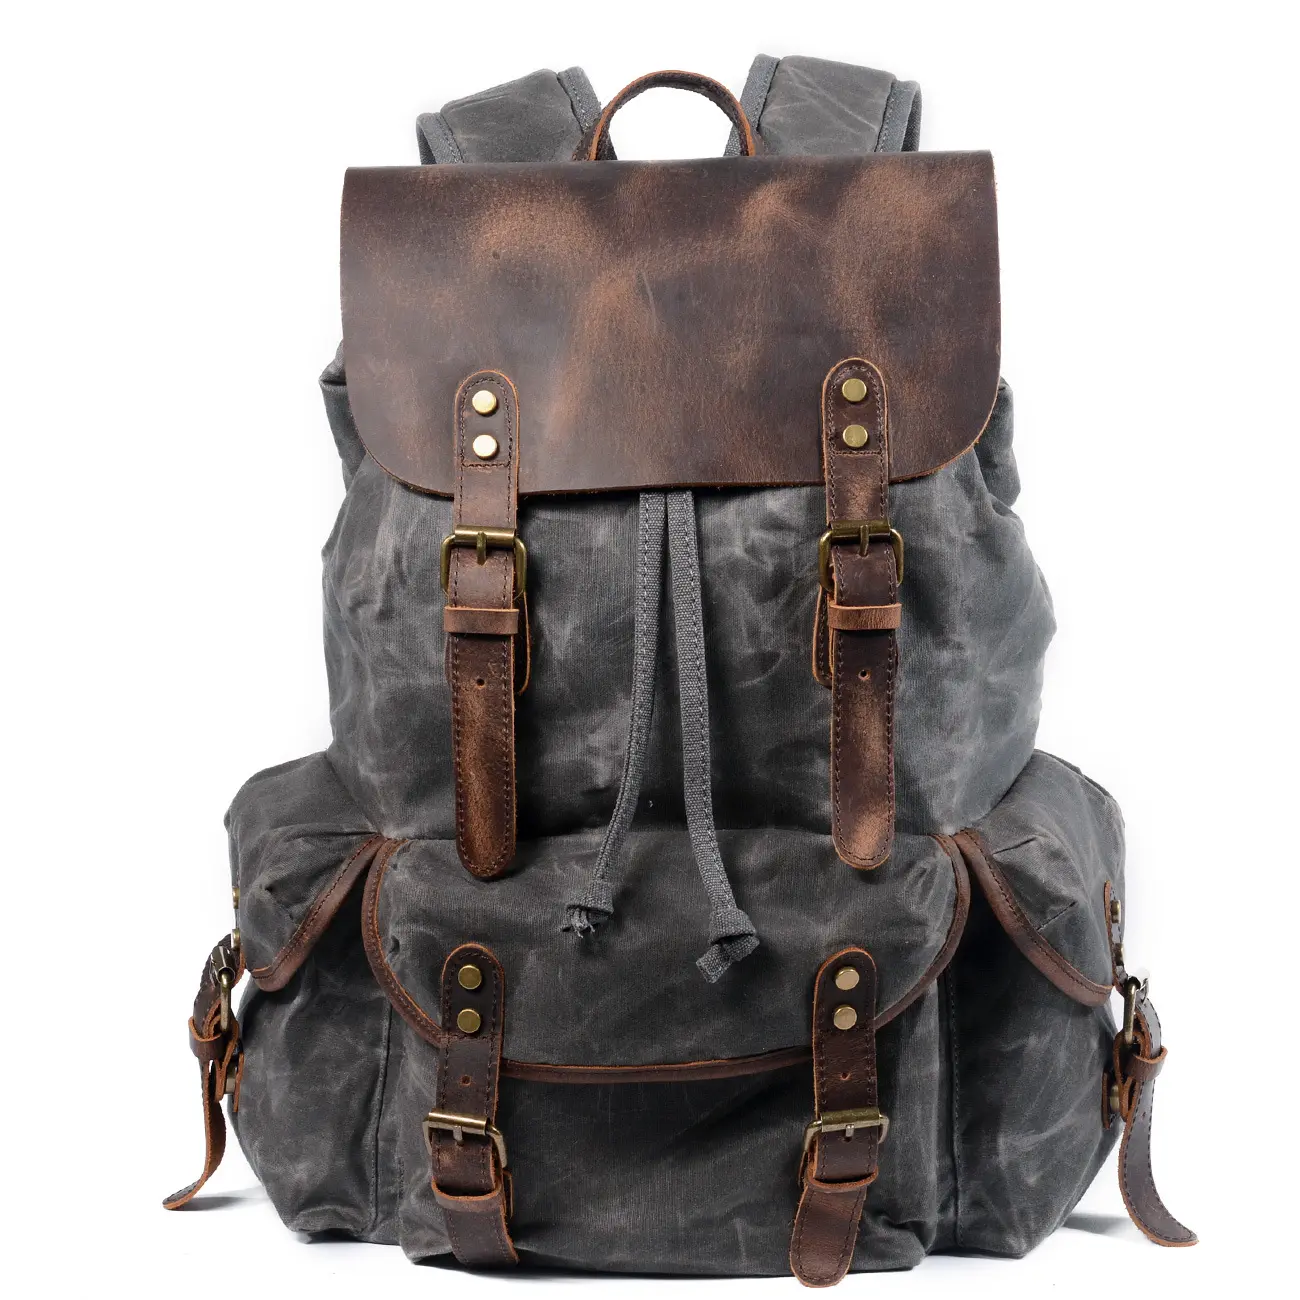 Mens Waxed Canvas Backpack Leather Rucksack for Men Wax Leather Backpacks Travel Vintage Bookbag with Laptop Compartment